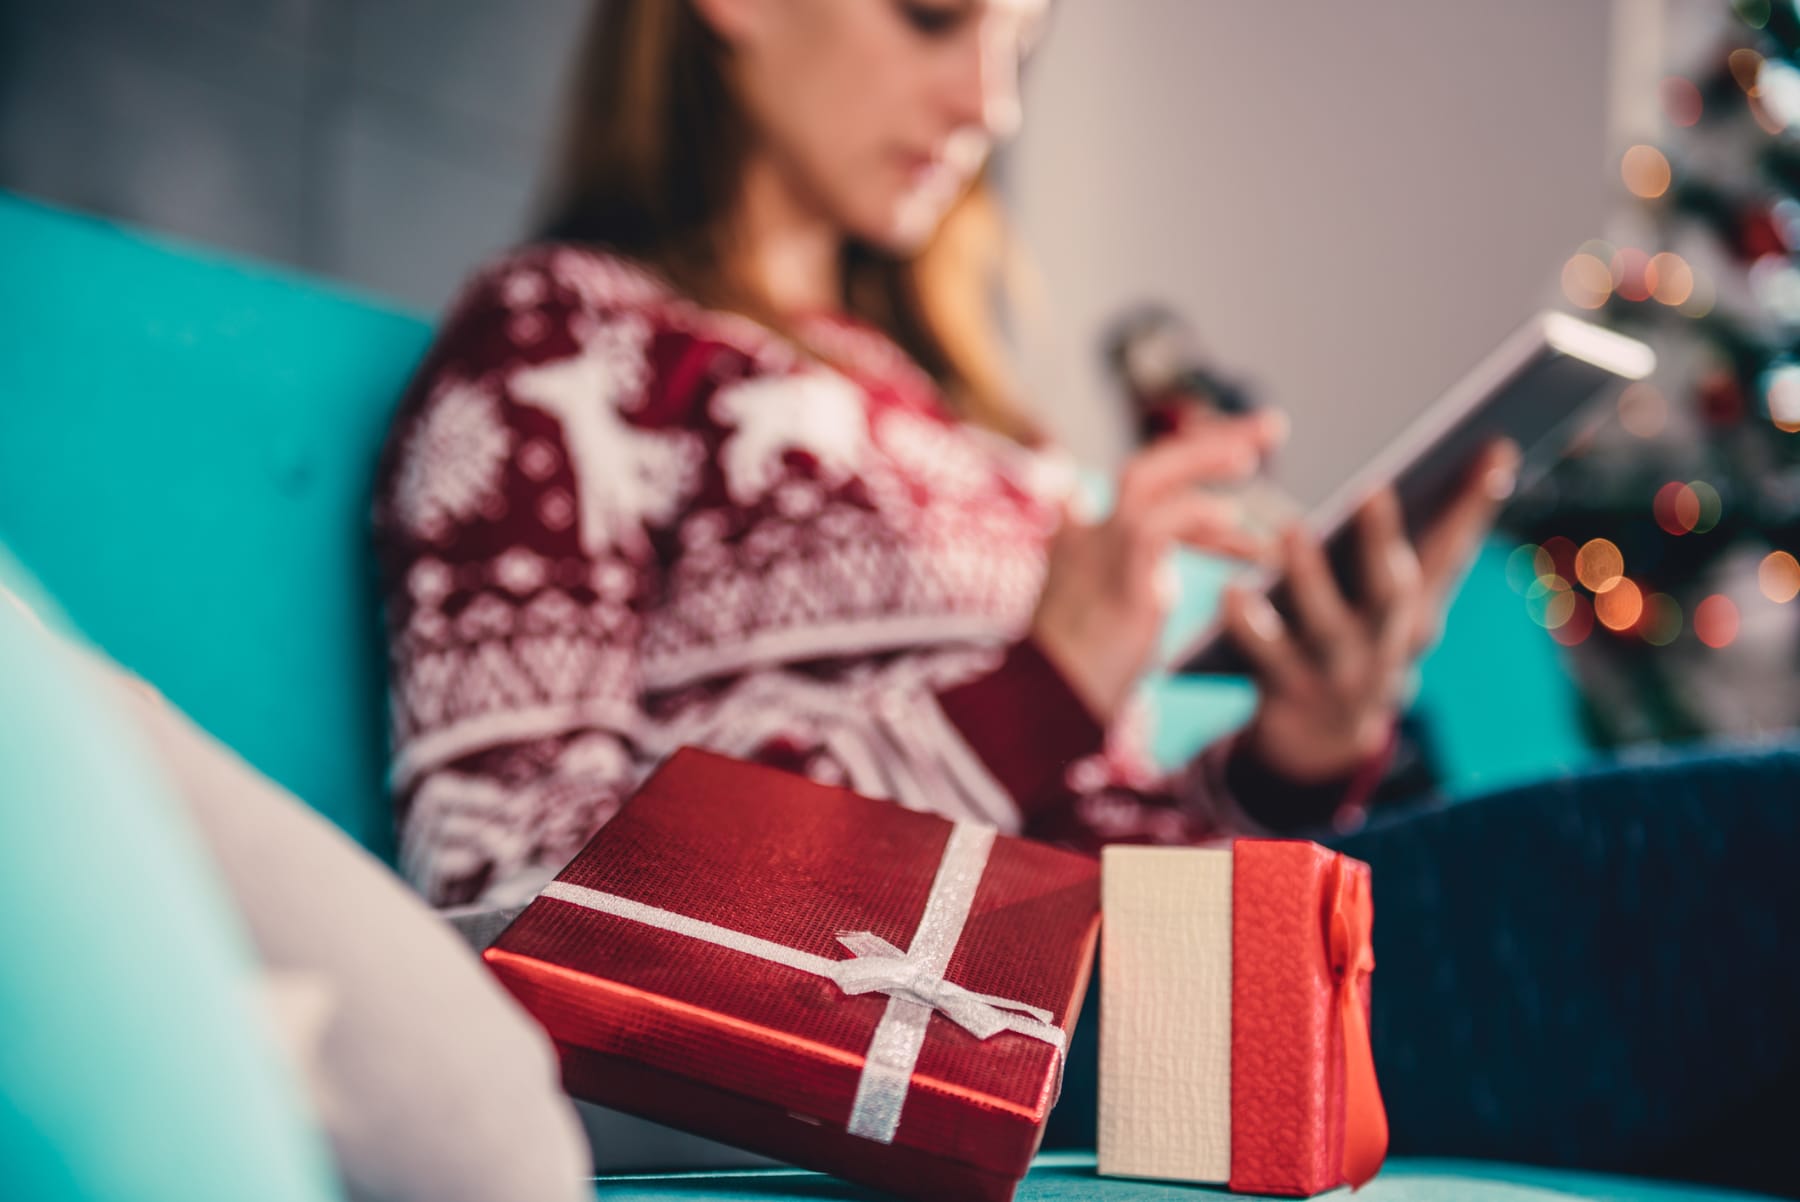 Woman shopping online next to holiday gifts.